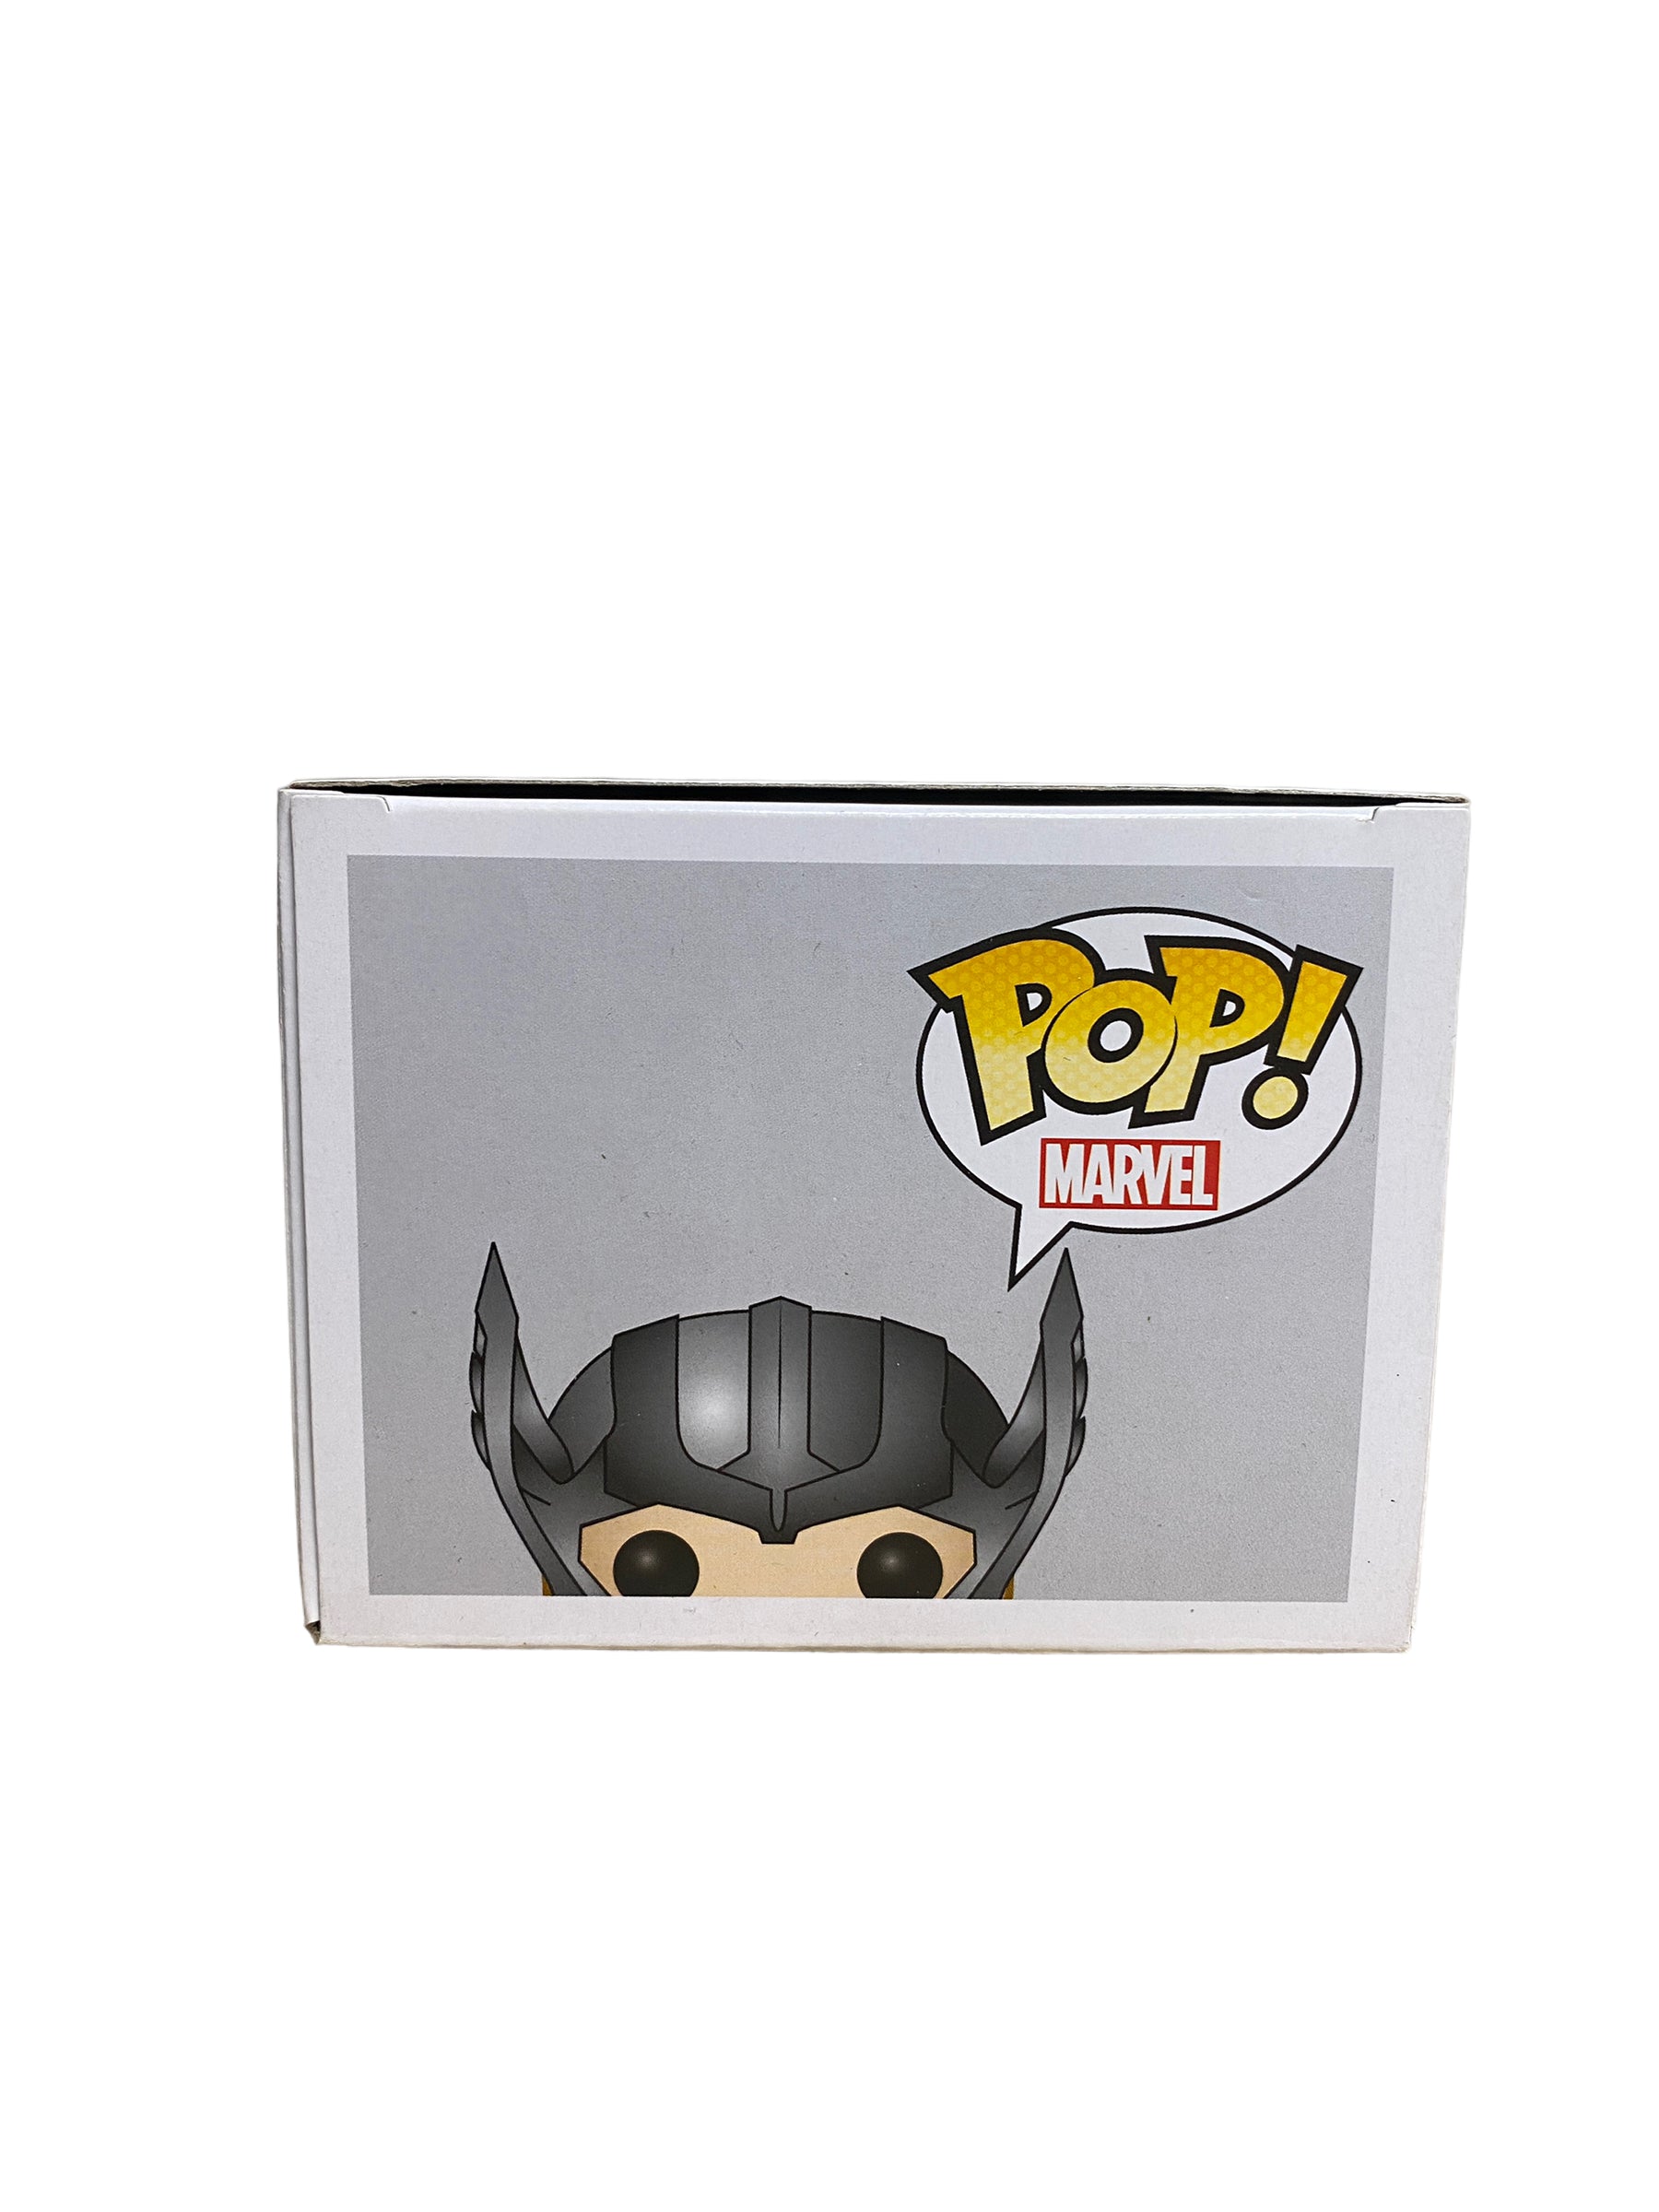 Thor with Helmet #38 Funko Pop! - Thor the Dark World - 2013 Pop! - Hot Topic Exclusive - Condition 8/10